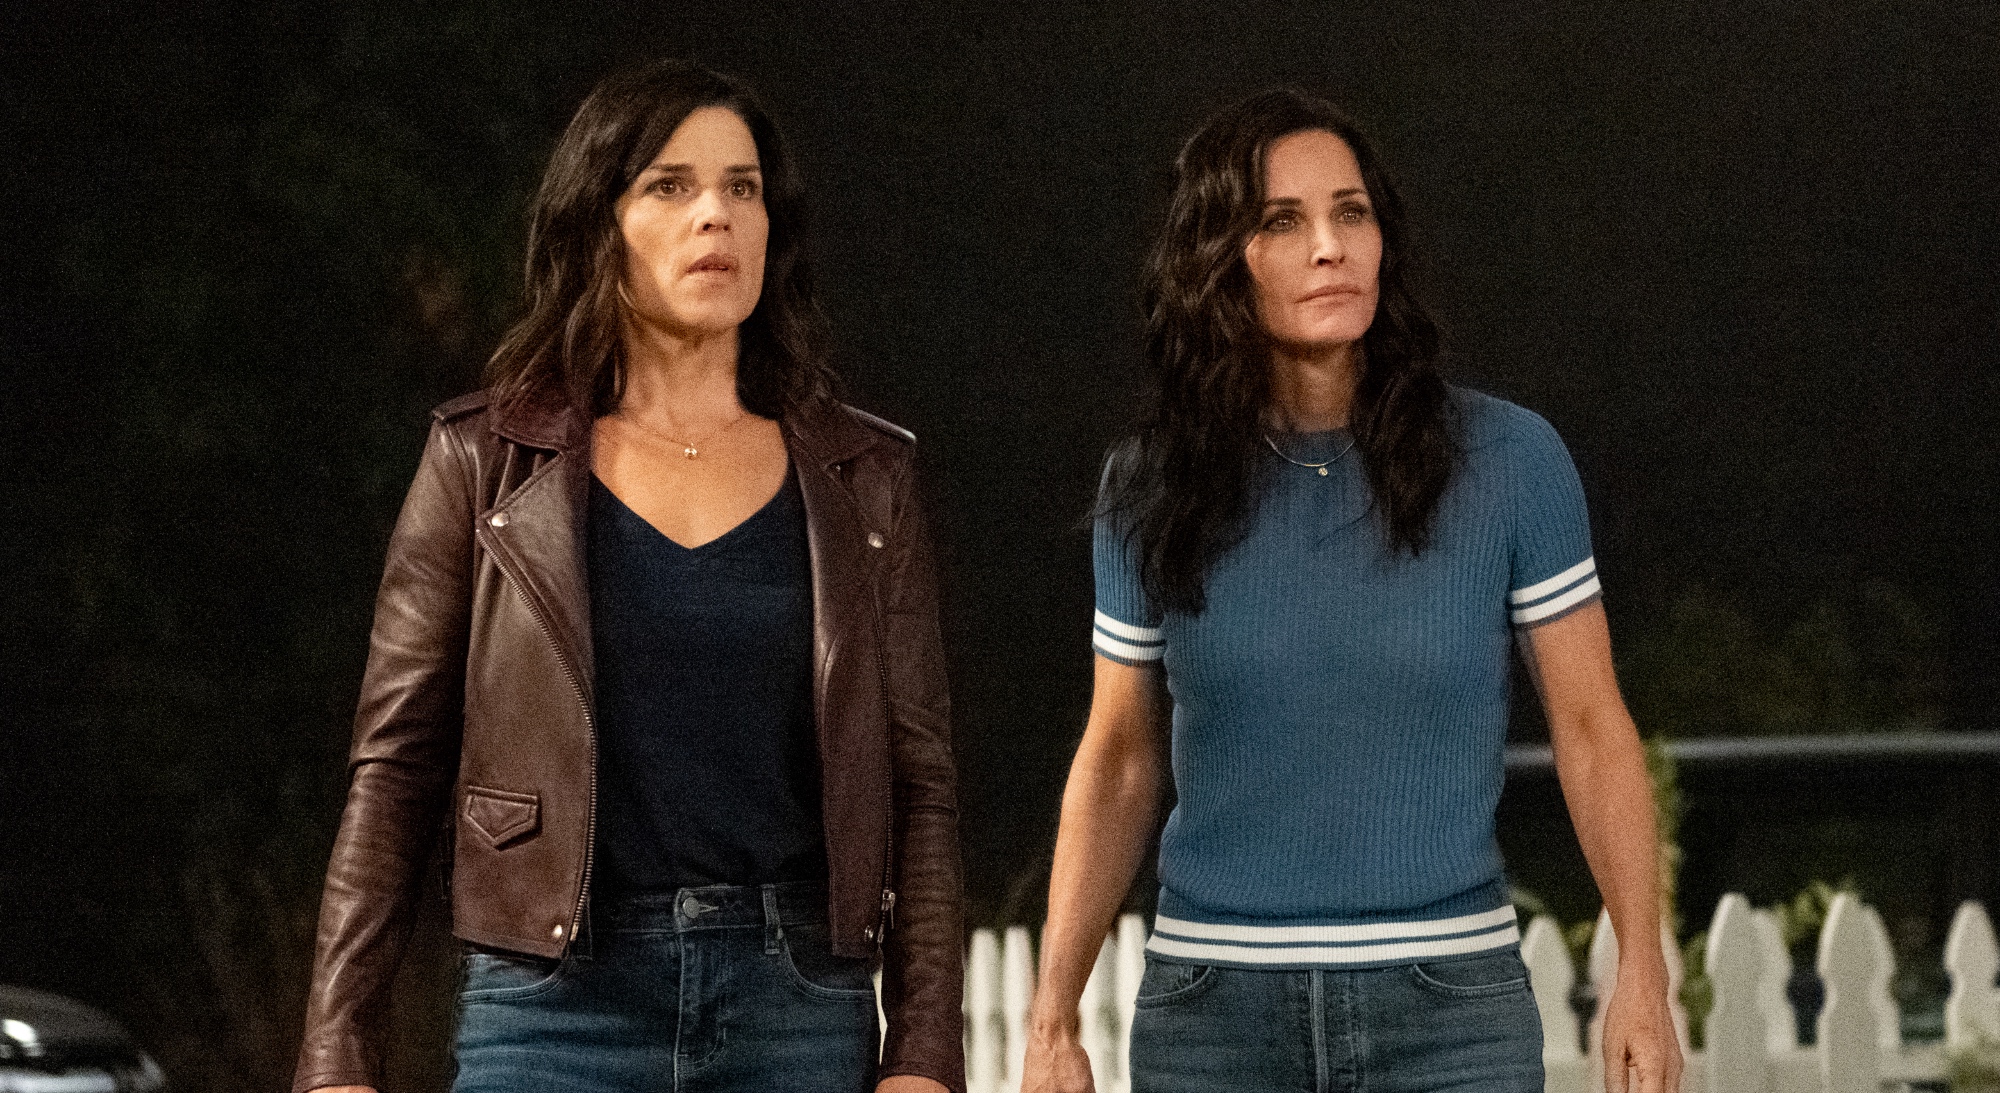 'Scream' review Neve Campbell as Sidney Prescott and Courteney Cox as Gale Weathers looking shocked in front of white picket fence